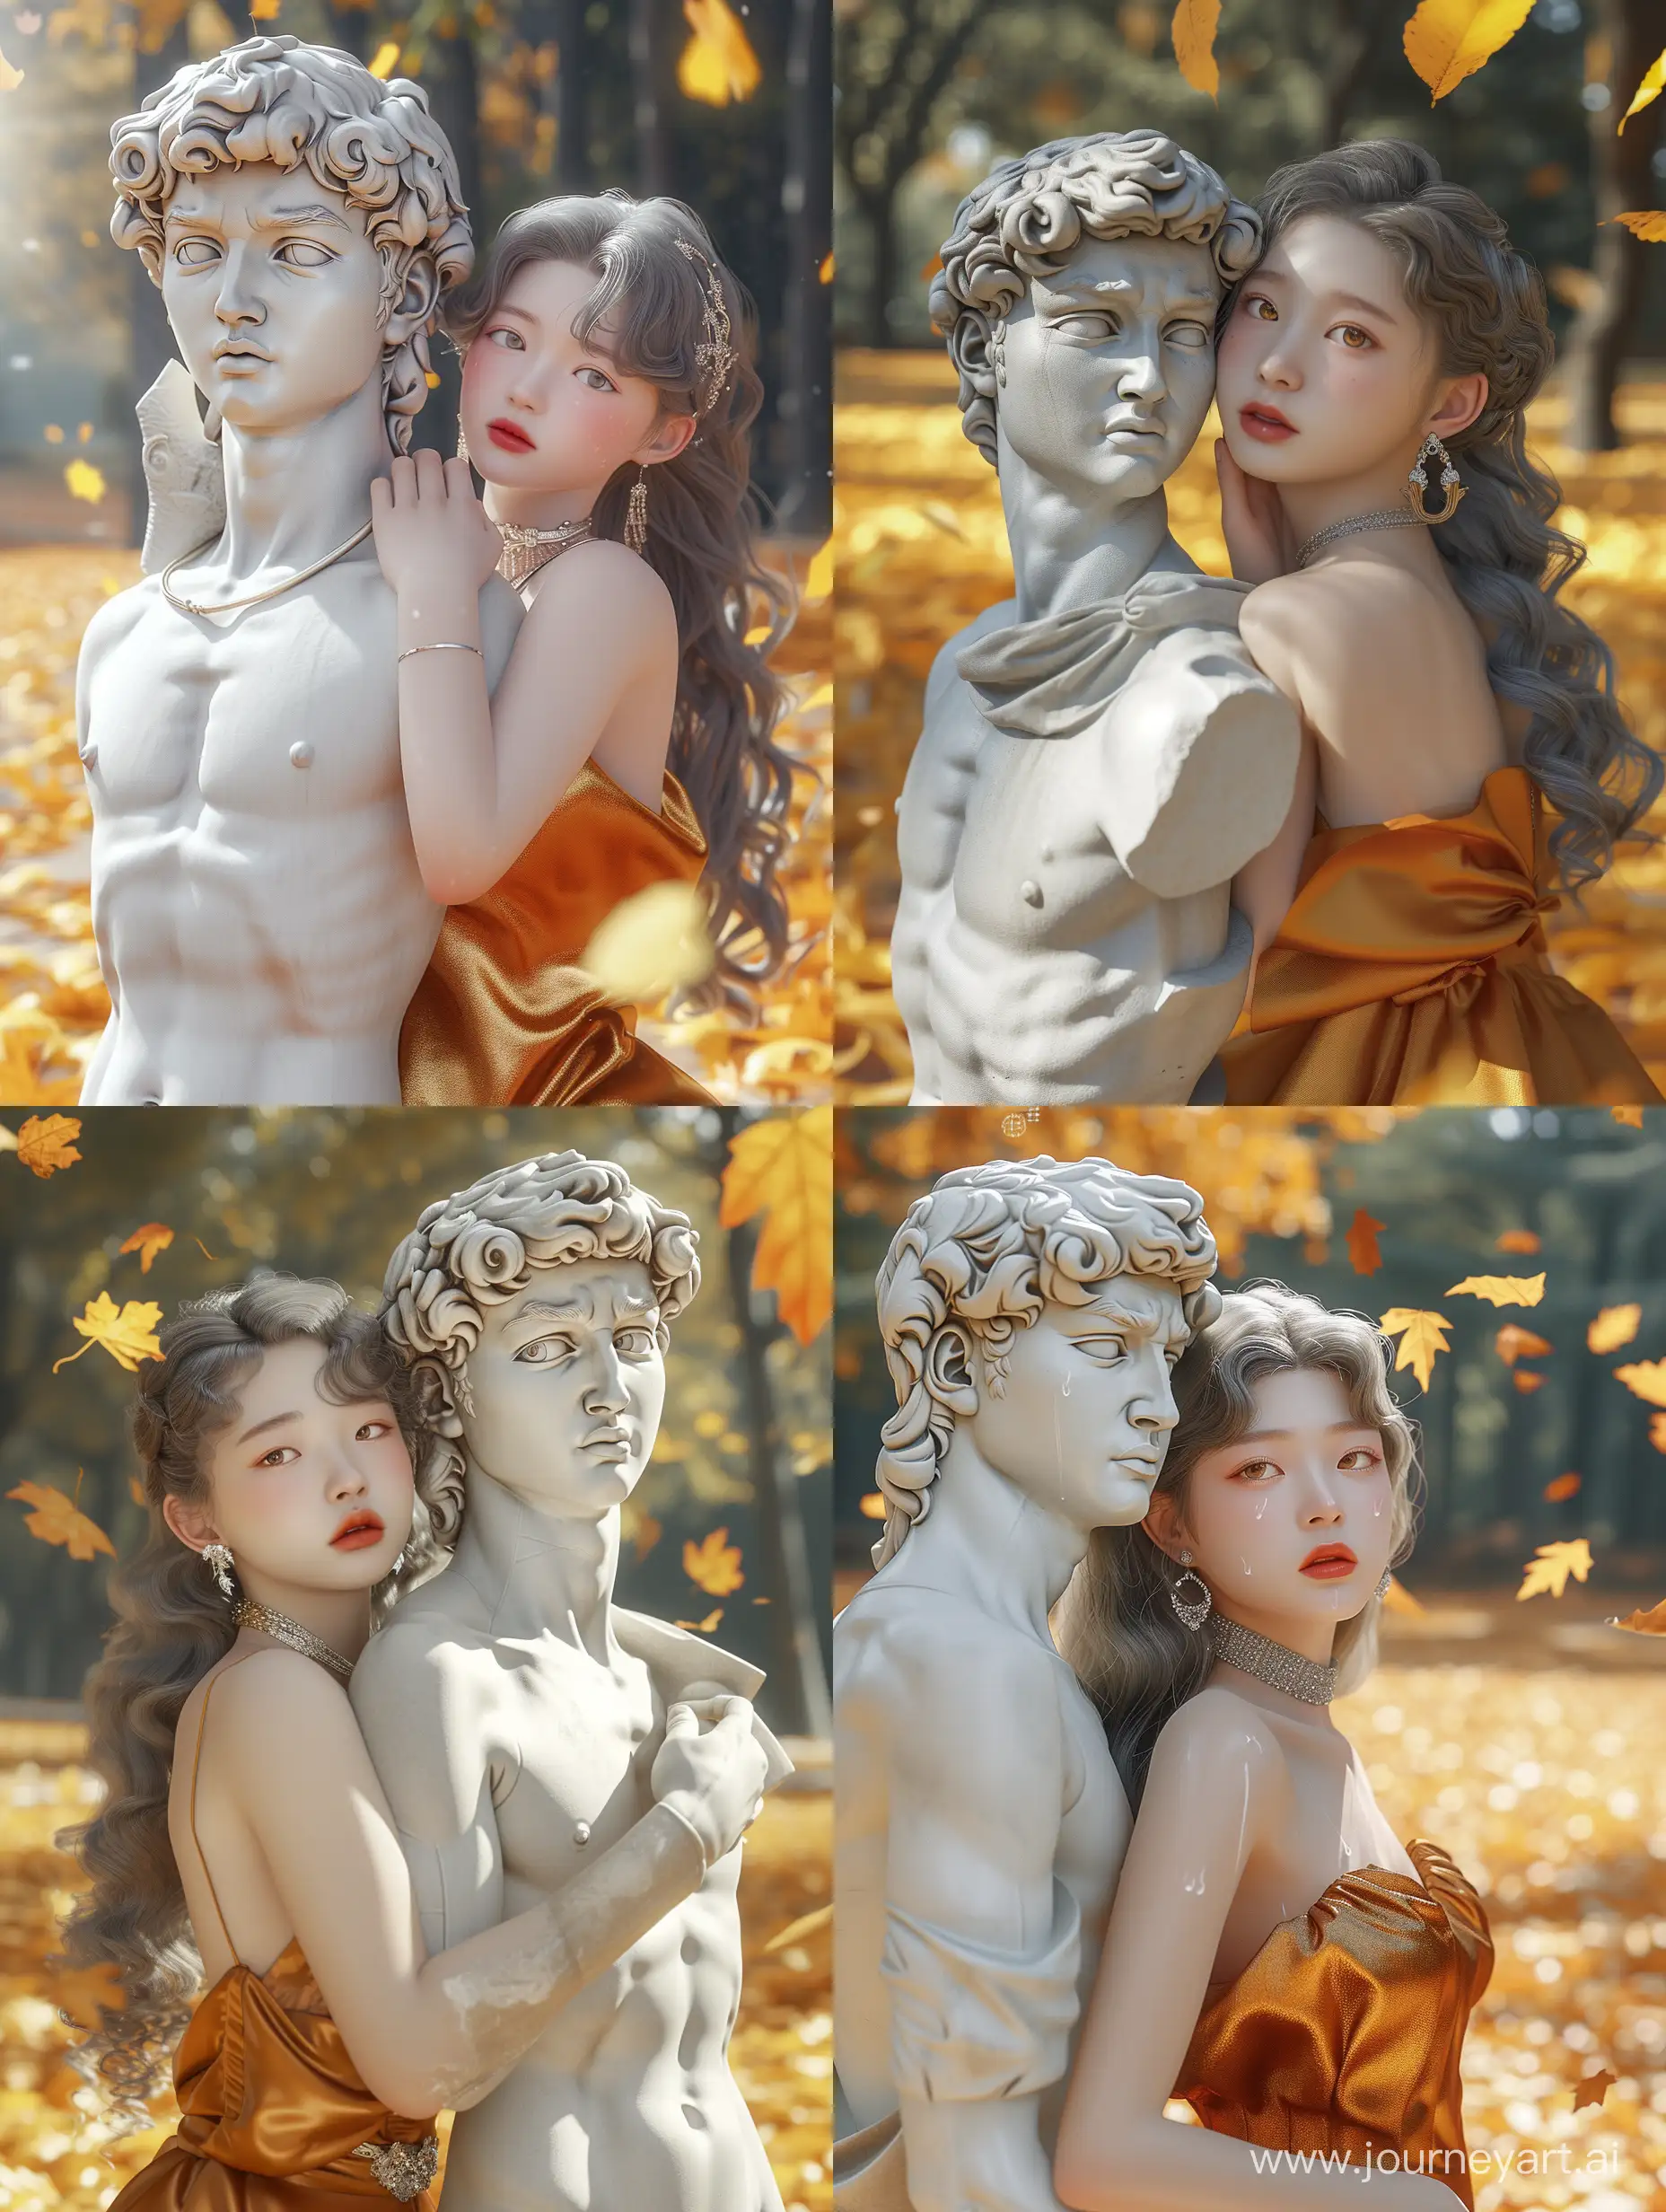 A realistic image full body of a young Asian girl, 21 years old, smooth skin, rosy cheeks, thick glossy lips, long silver gray hair, earrings, necklace made of detailed metal, her face She showed emotional emotion, she wore a simple amber dress made of shiny silk, she leaned her back against the statue and put her arms behind her around the neck of the glossy white stone statue of a young man with curly hair. , the statue is taller than the girl, many yellow leaves fall on the ground in the park, fallen leaves fly in the wind, bright sunlight refracts on the object, detailed, high quality, 4k, 8k